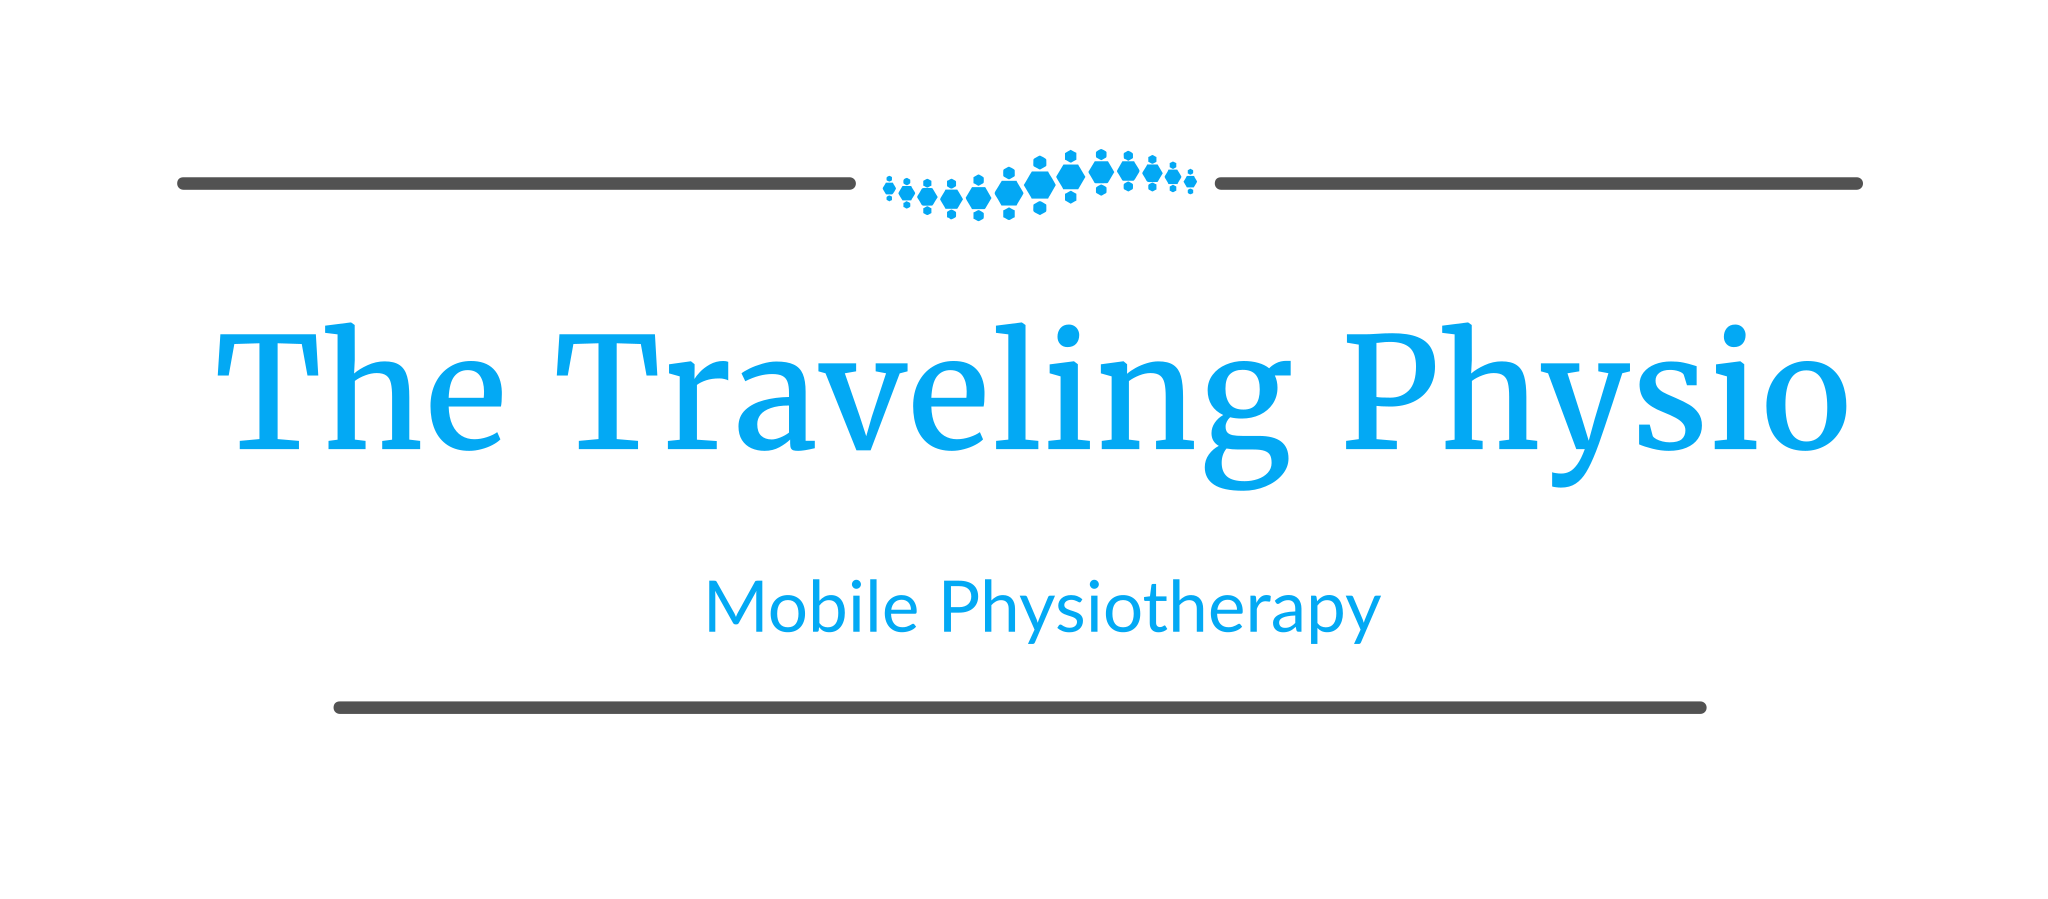 The Traveling Physio